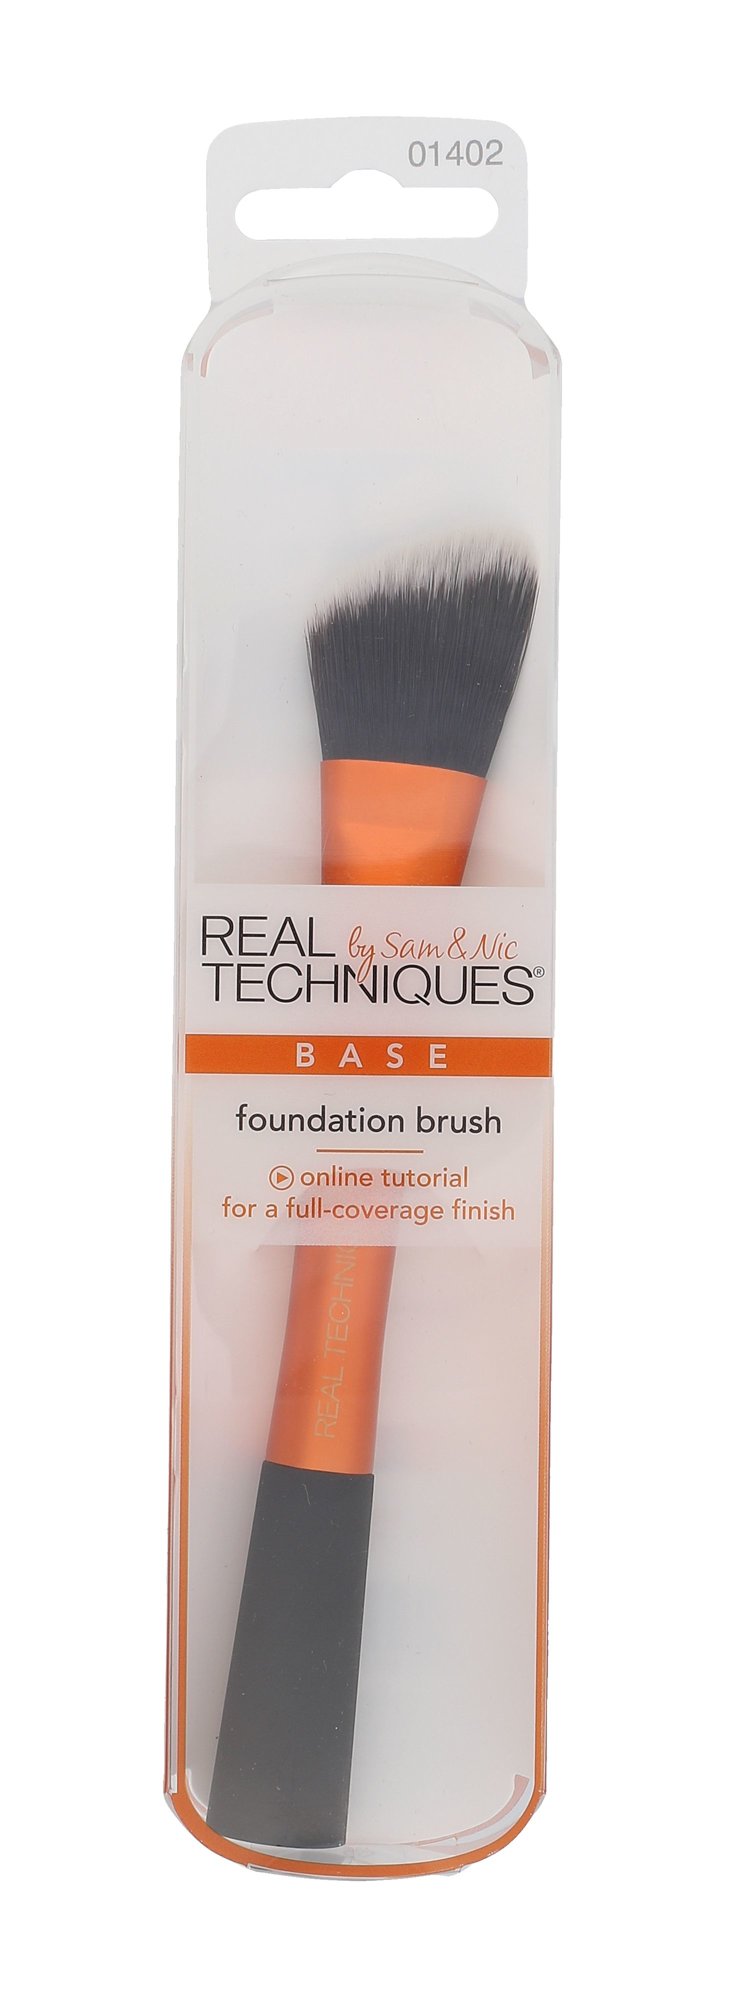 Real Techniques Base Foundation Brush